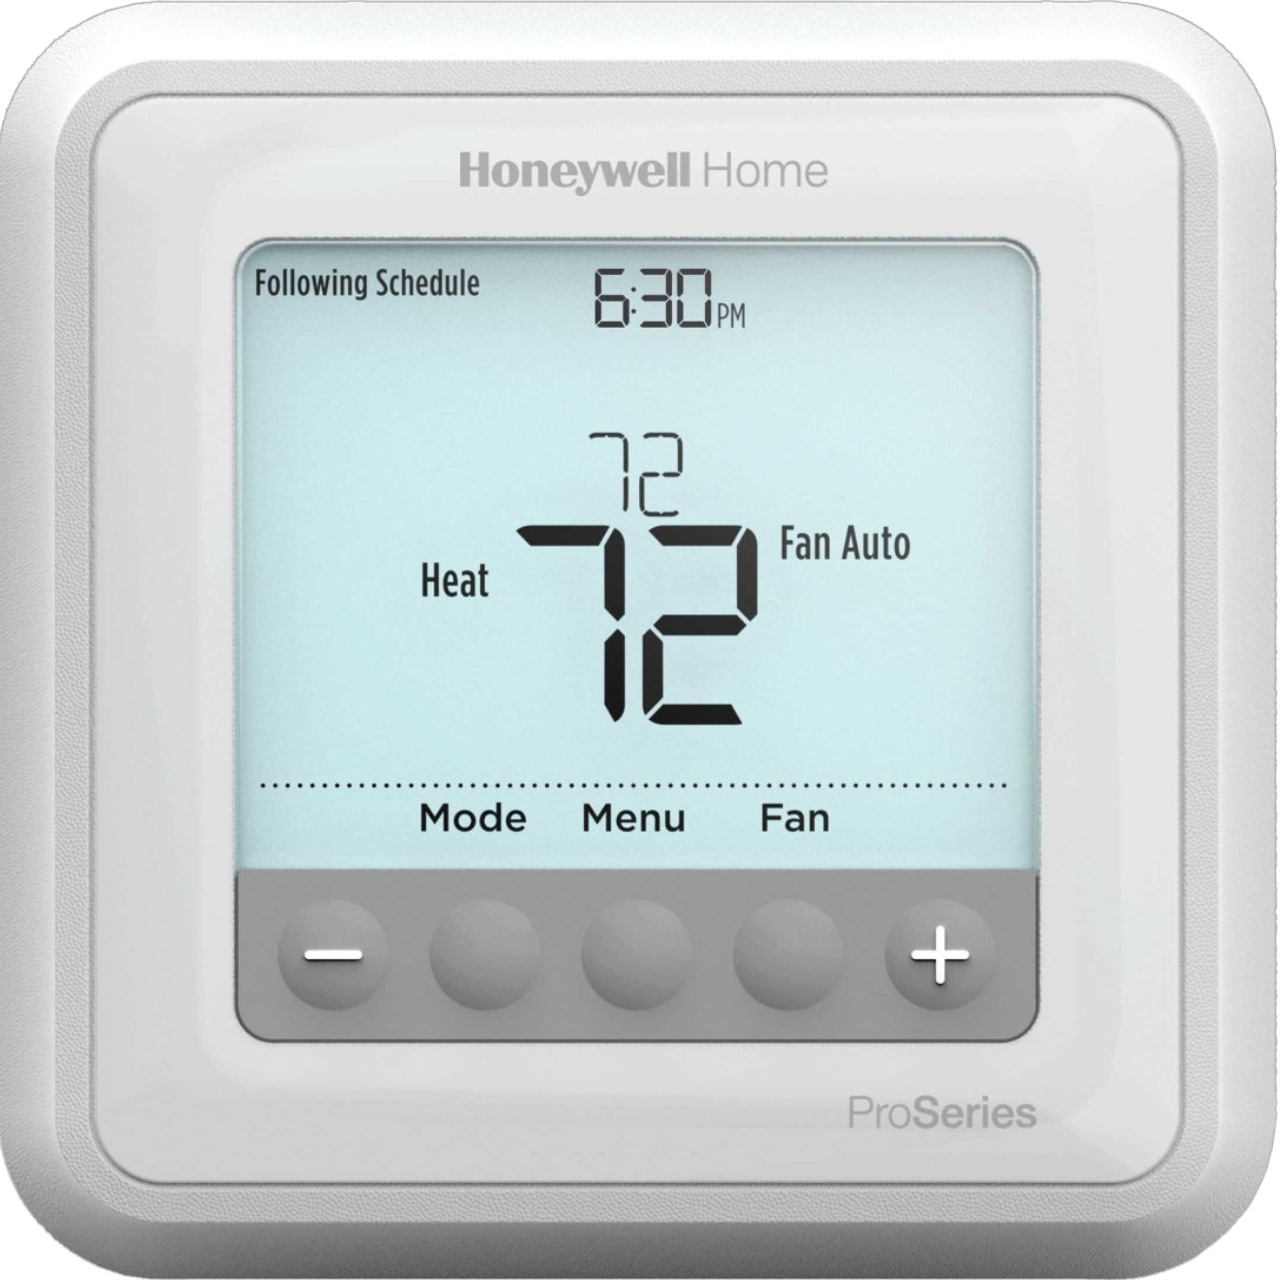 Honeywell Home Thermostat Carmel, IN | LCS Heating & Cooling